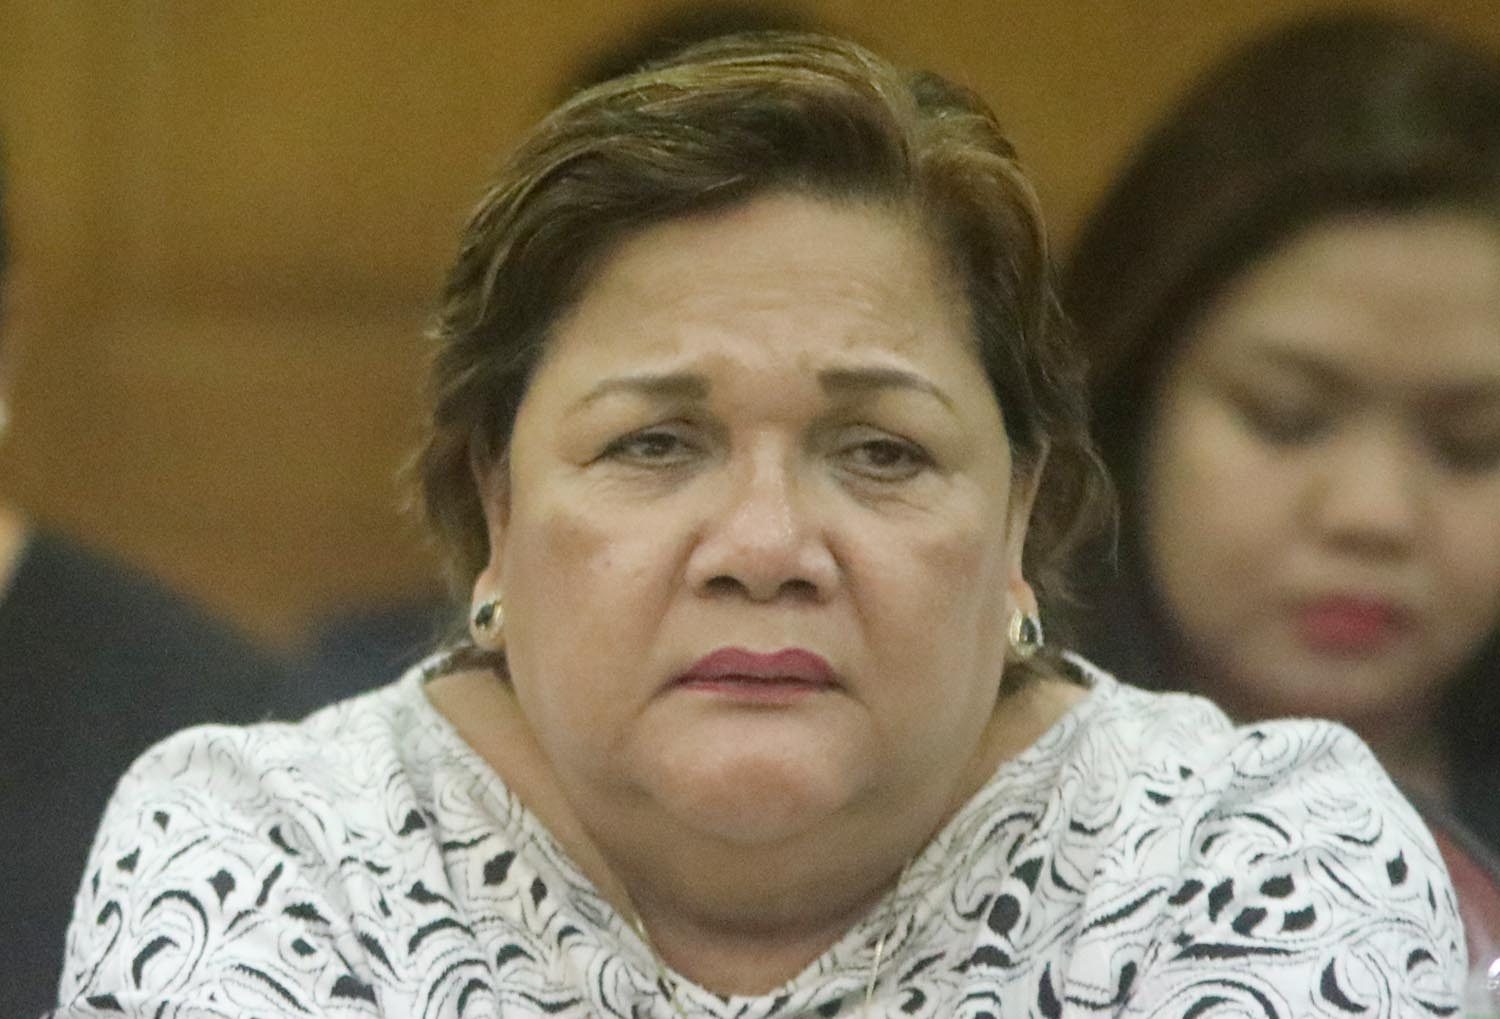 Who is the judge who ordered De Lima’s arrest?